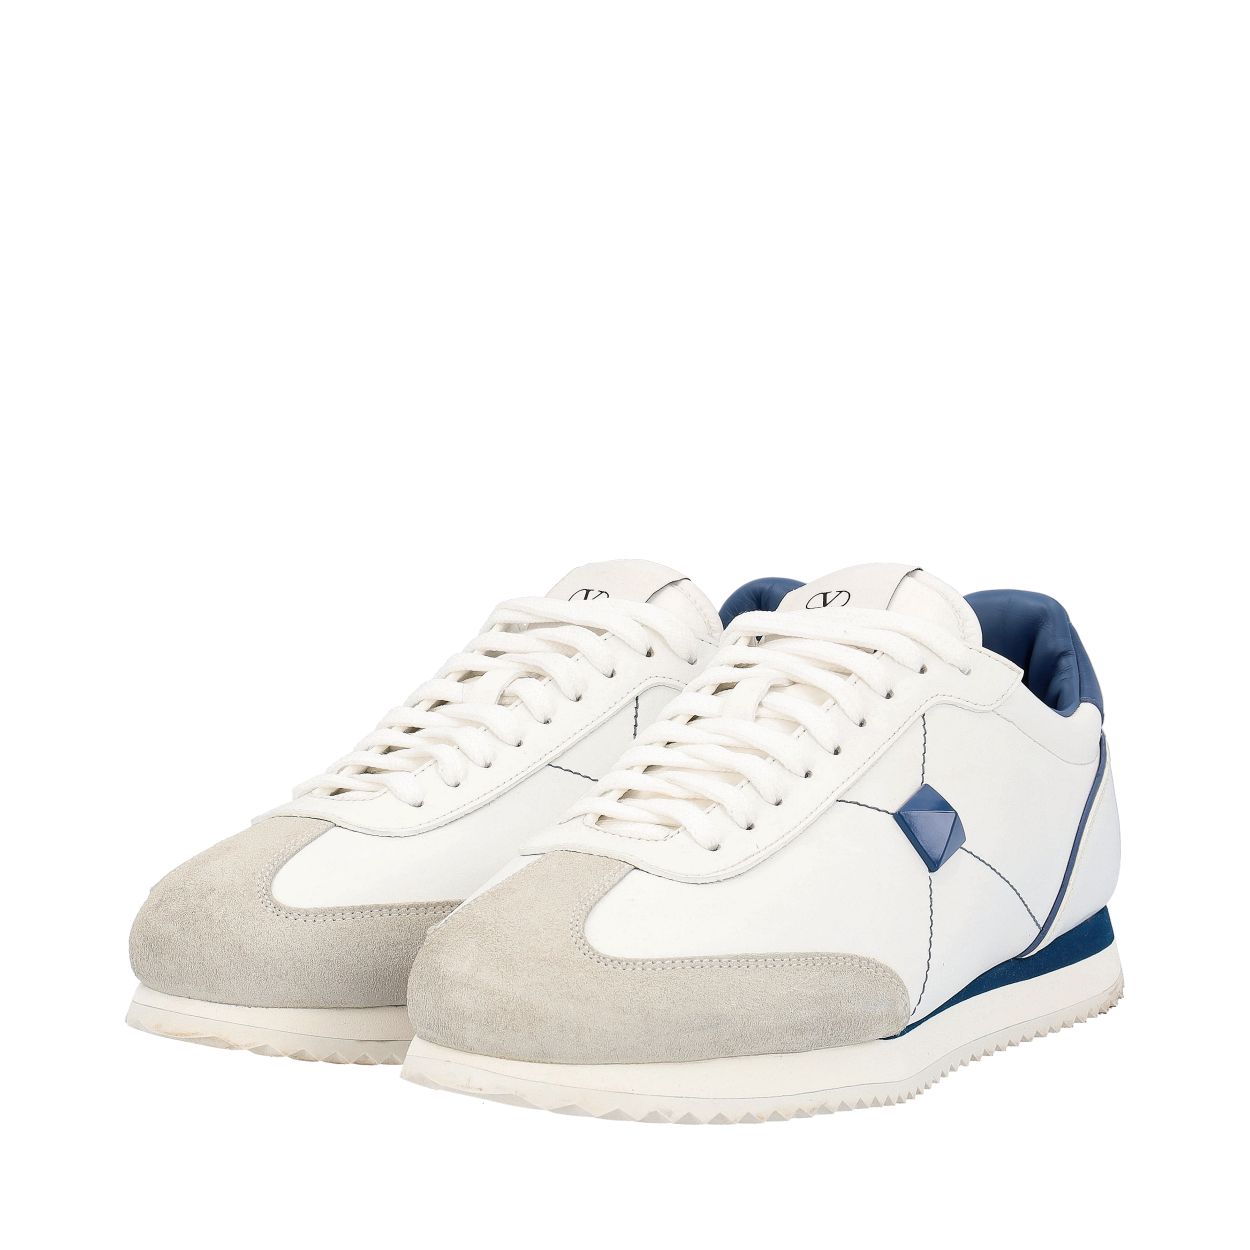 VALENTINO Leather/Suede Stud Around Sneakers White/Blue | Luxity